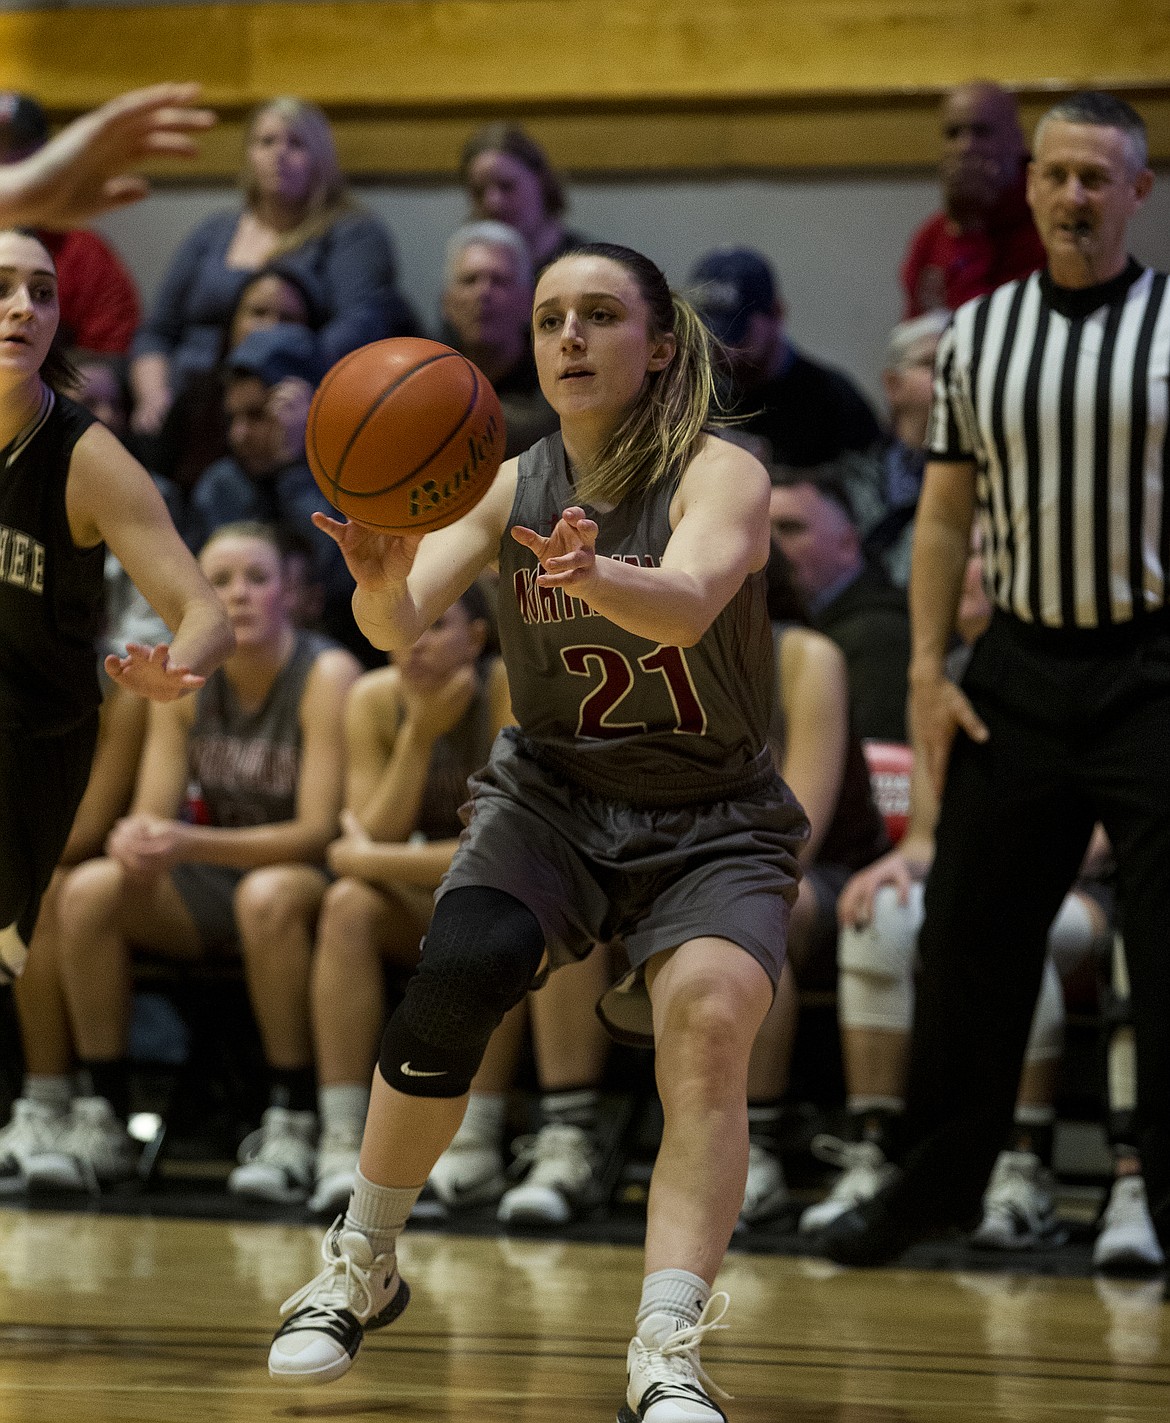 Shae Logozzo of North Idaho College passes the ball against Wenatchee Valley.